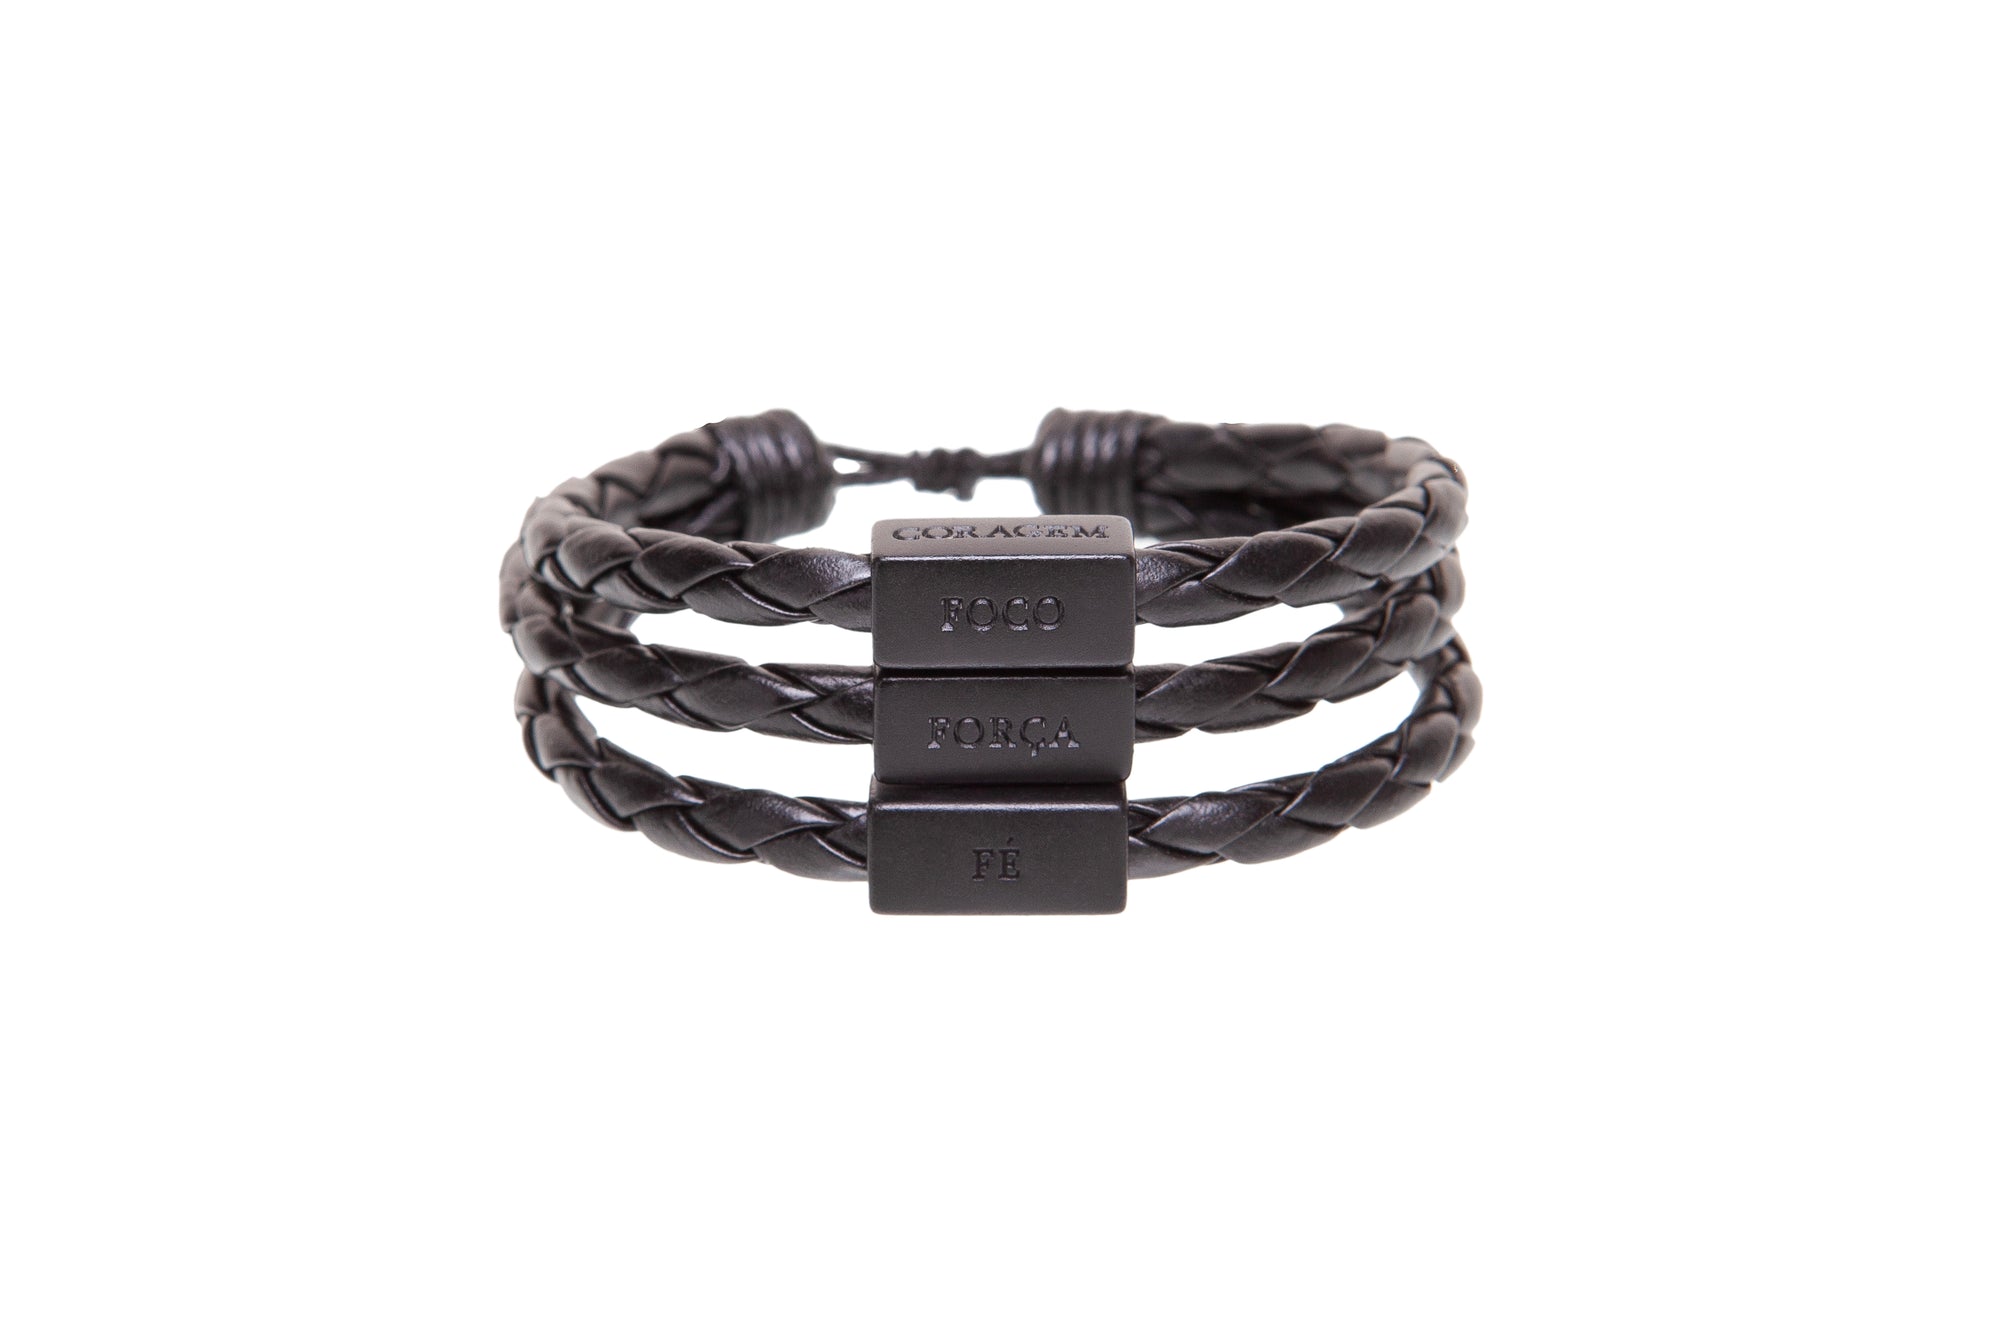 Men's Bracelet Black Leather Silver Adjustable with words of Focus, Strength, Faith, & Courage in Portuguese - Unisex Man's Bracelet - Male Jewelry - Pre Order